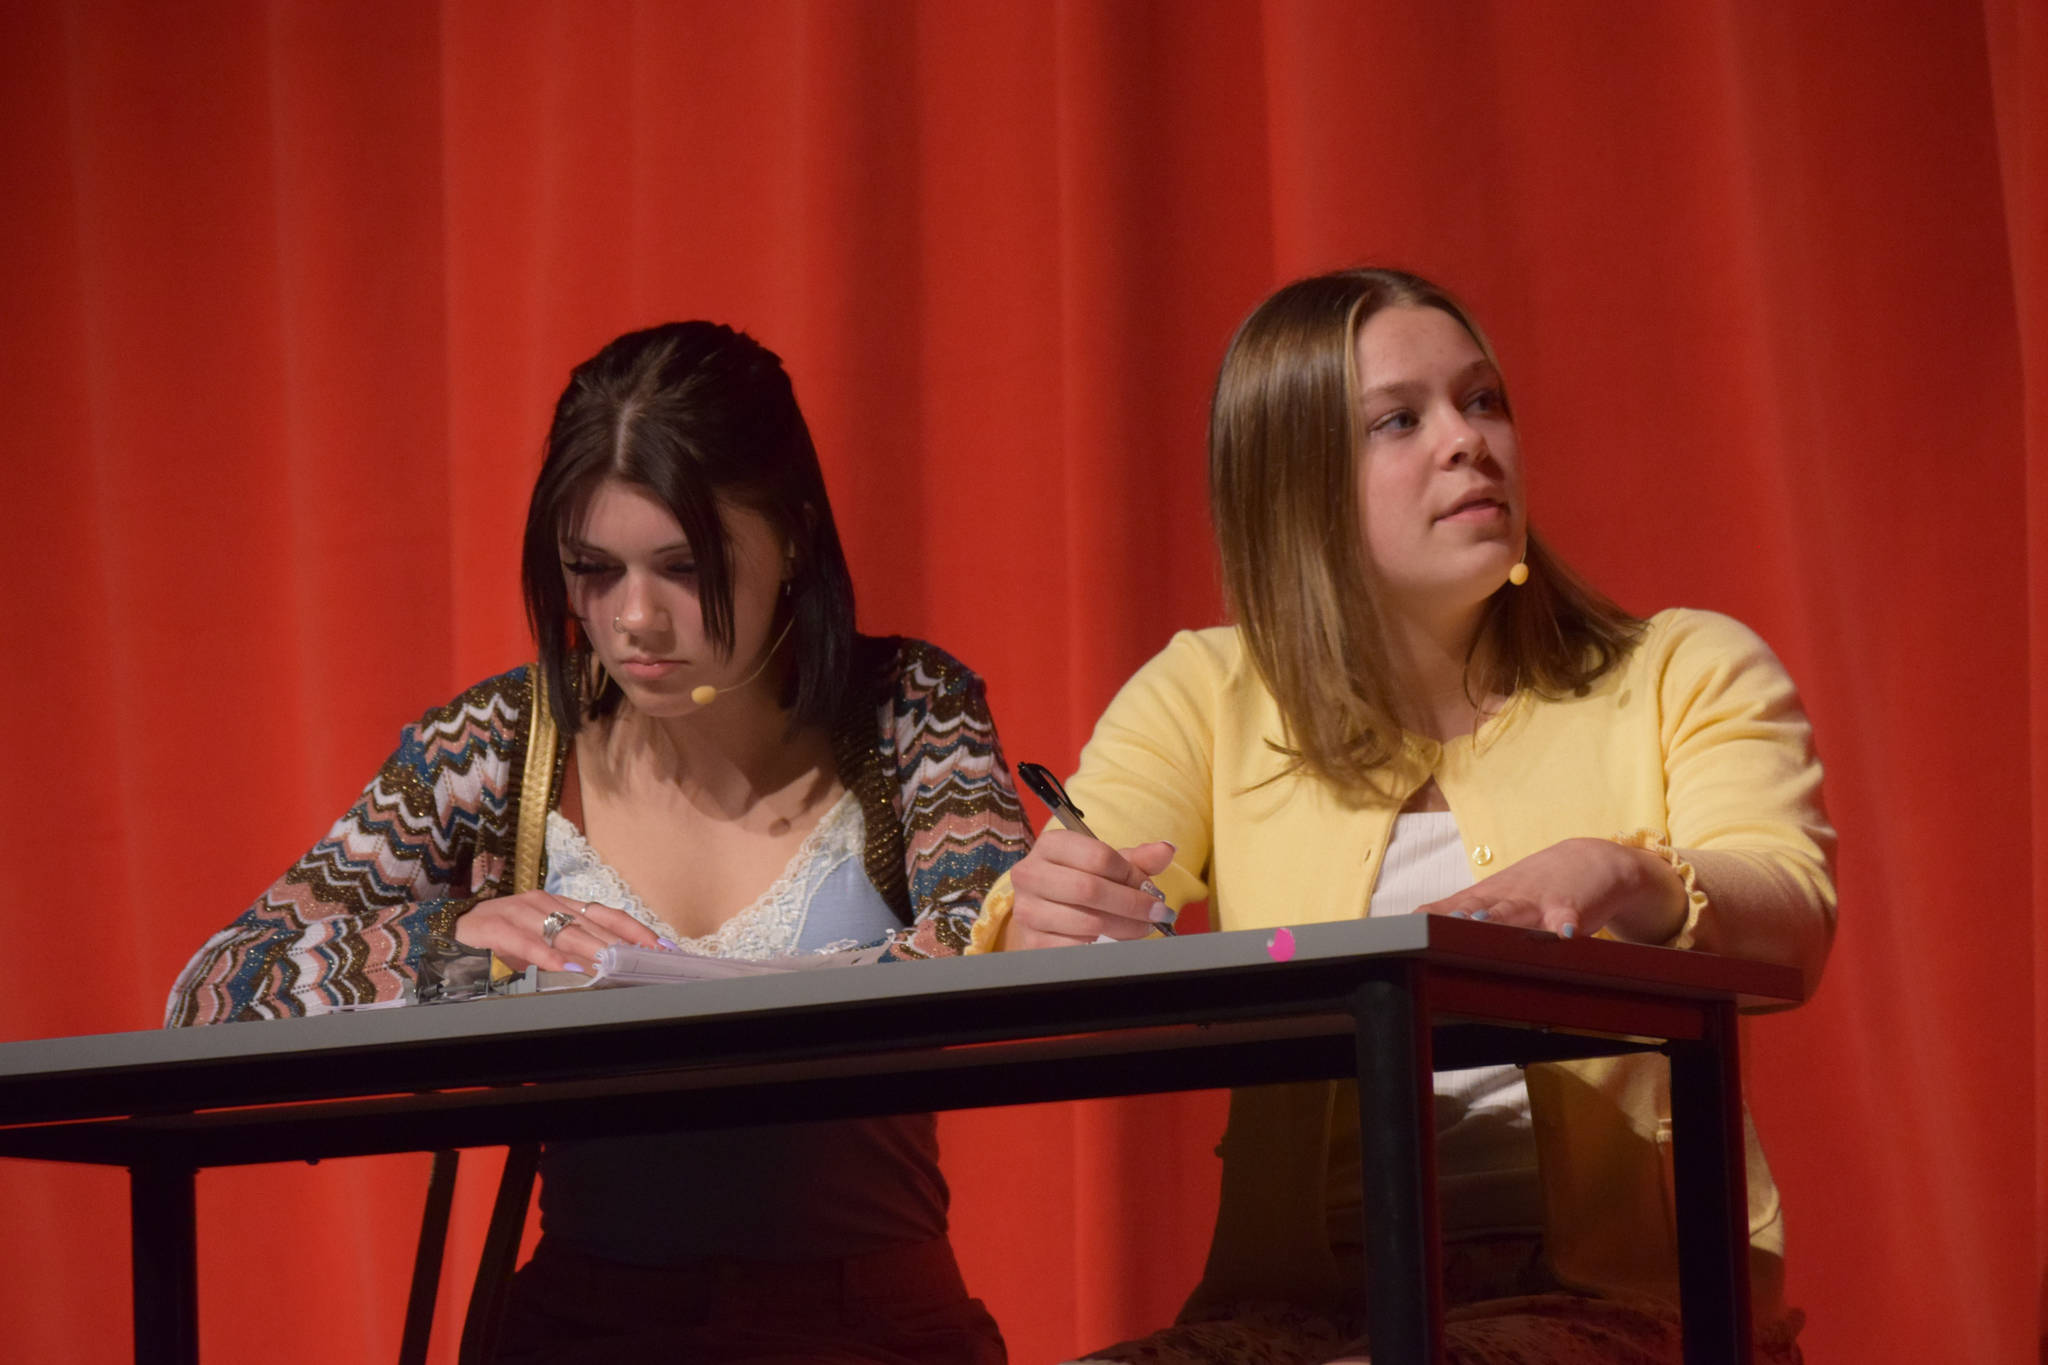 Shylea Freeman (left) and Camry Ellis act onstage as their characters Sharpay Evans and Gabriella Montez in the Nikiski Middle/High School’s spring production of “High School Musical” in Nikiski, Alaska, on Wednesday May 5, 2021. (Camille Botello / Peninsula Clarion)